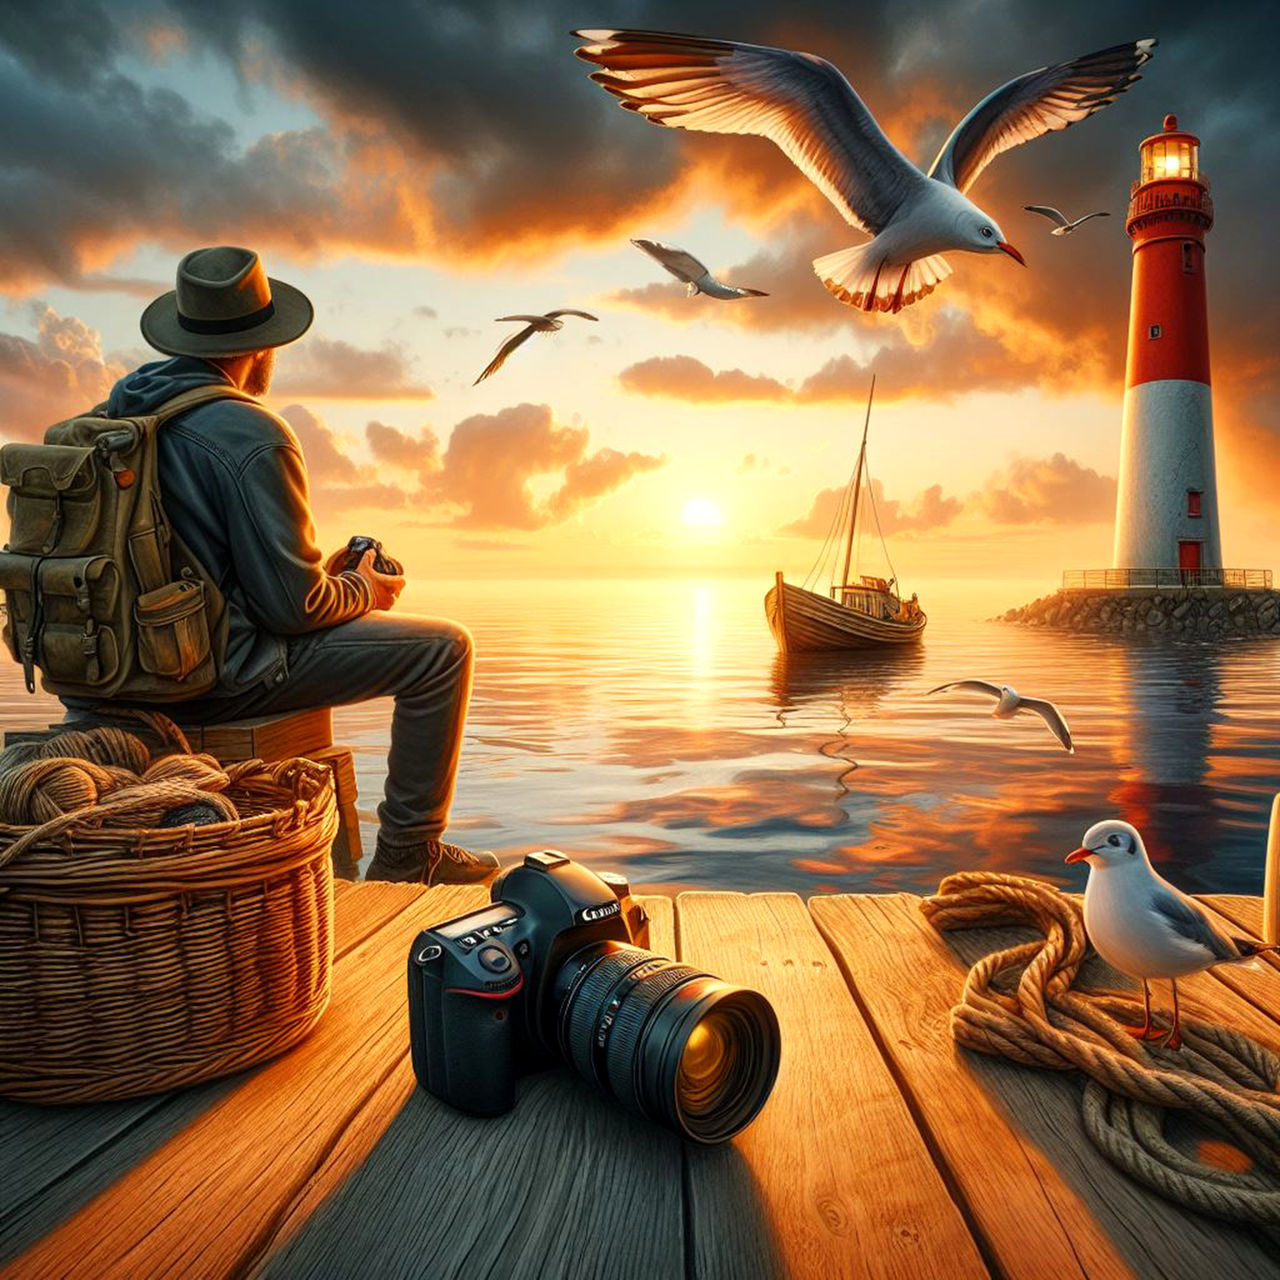 sky, sea, water, bird, sunset, lighthouse, animal, nautical vessel, animal themes, nature, cloud, animal wildlife, wildlife, architecture, transportation, beauty in nature, men, vehicle, travel destinations, travel, land, ship, mode of transportation, adult, flying, occupation, beach, outdoors, person